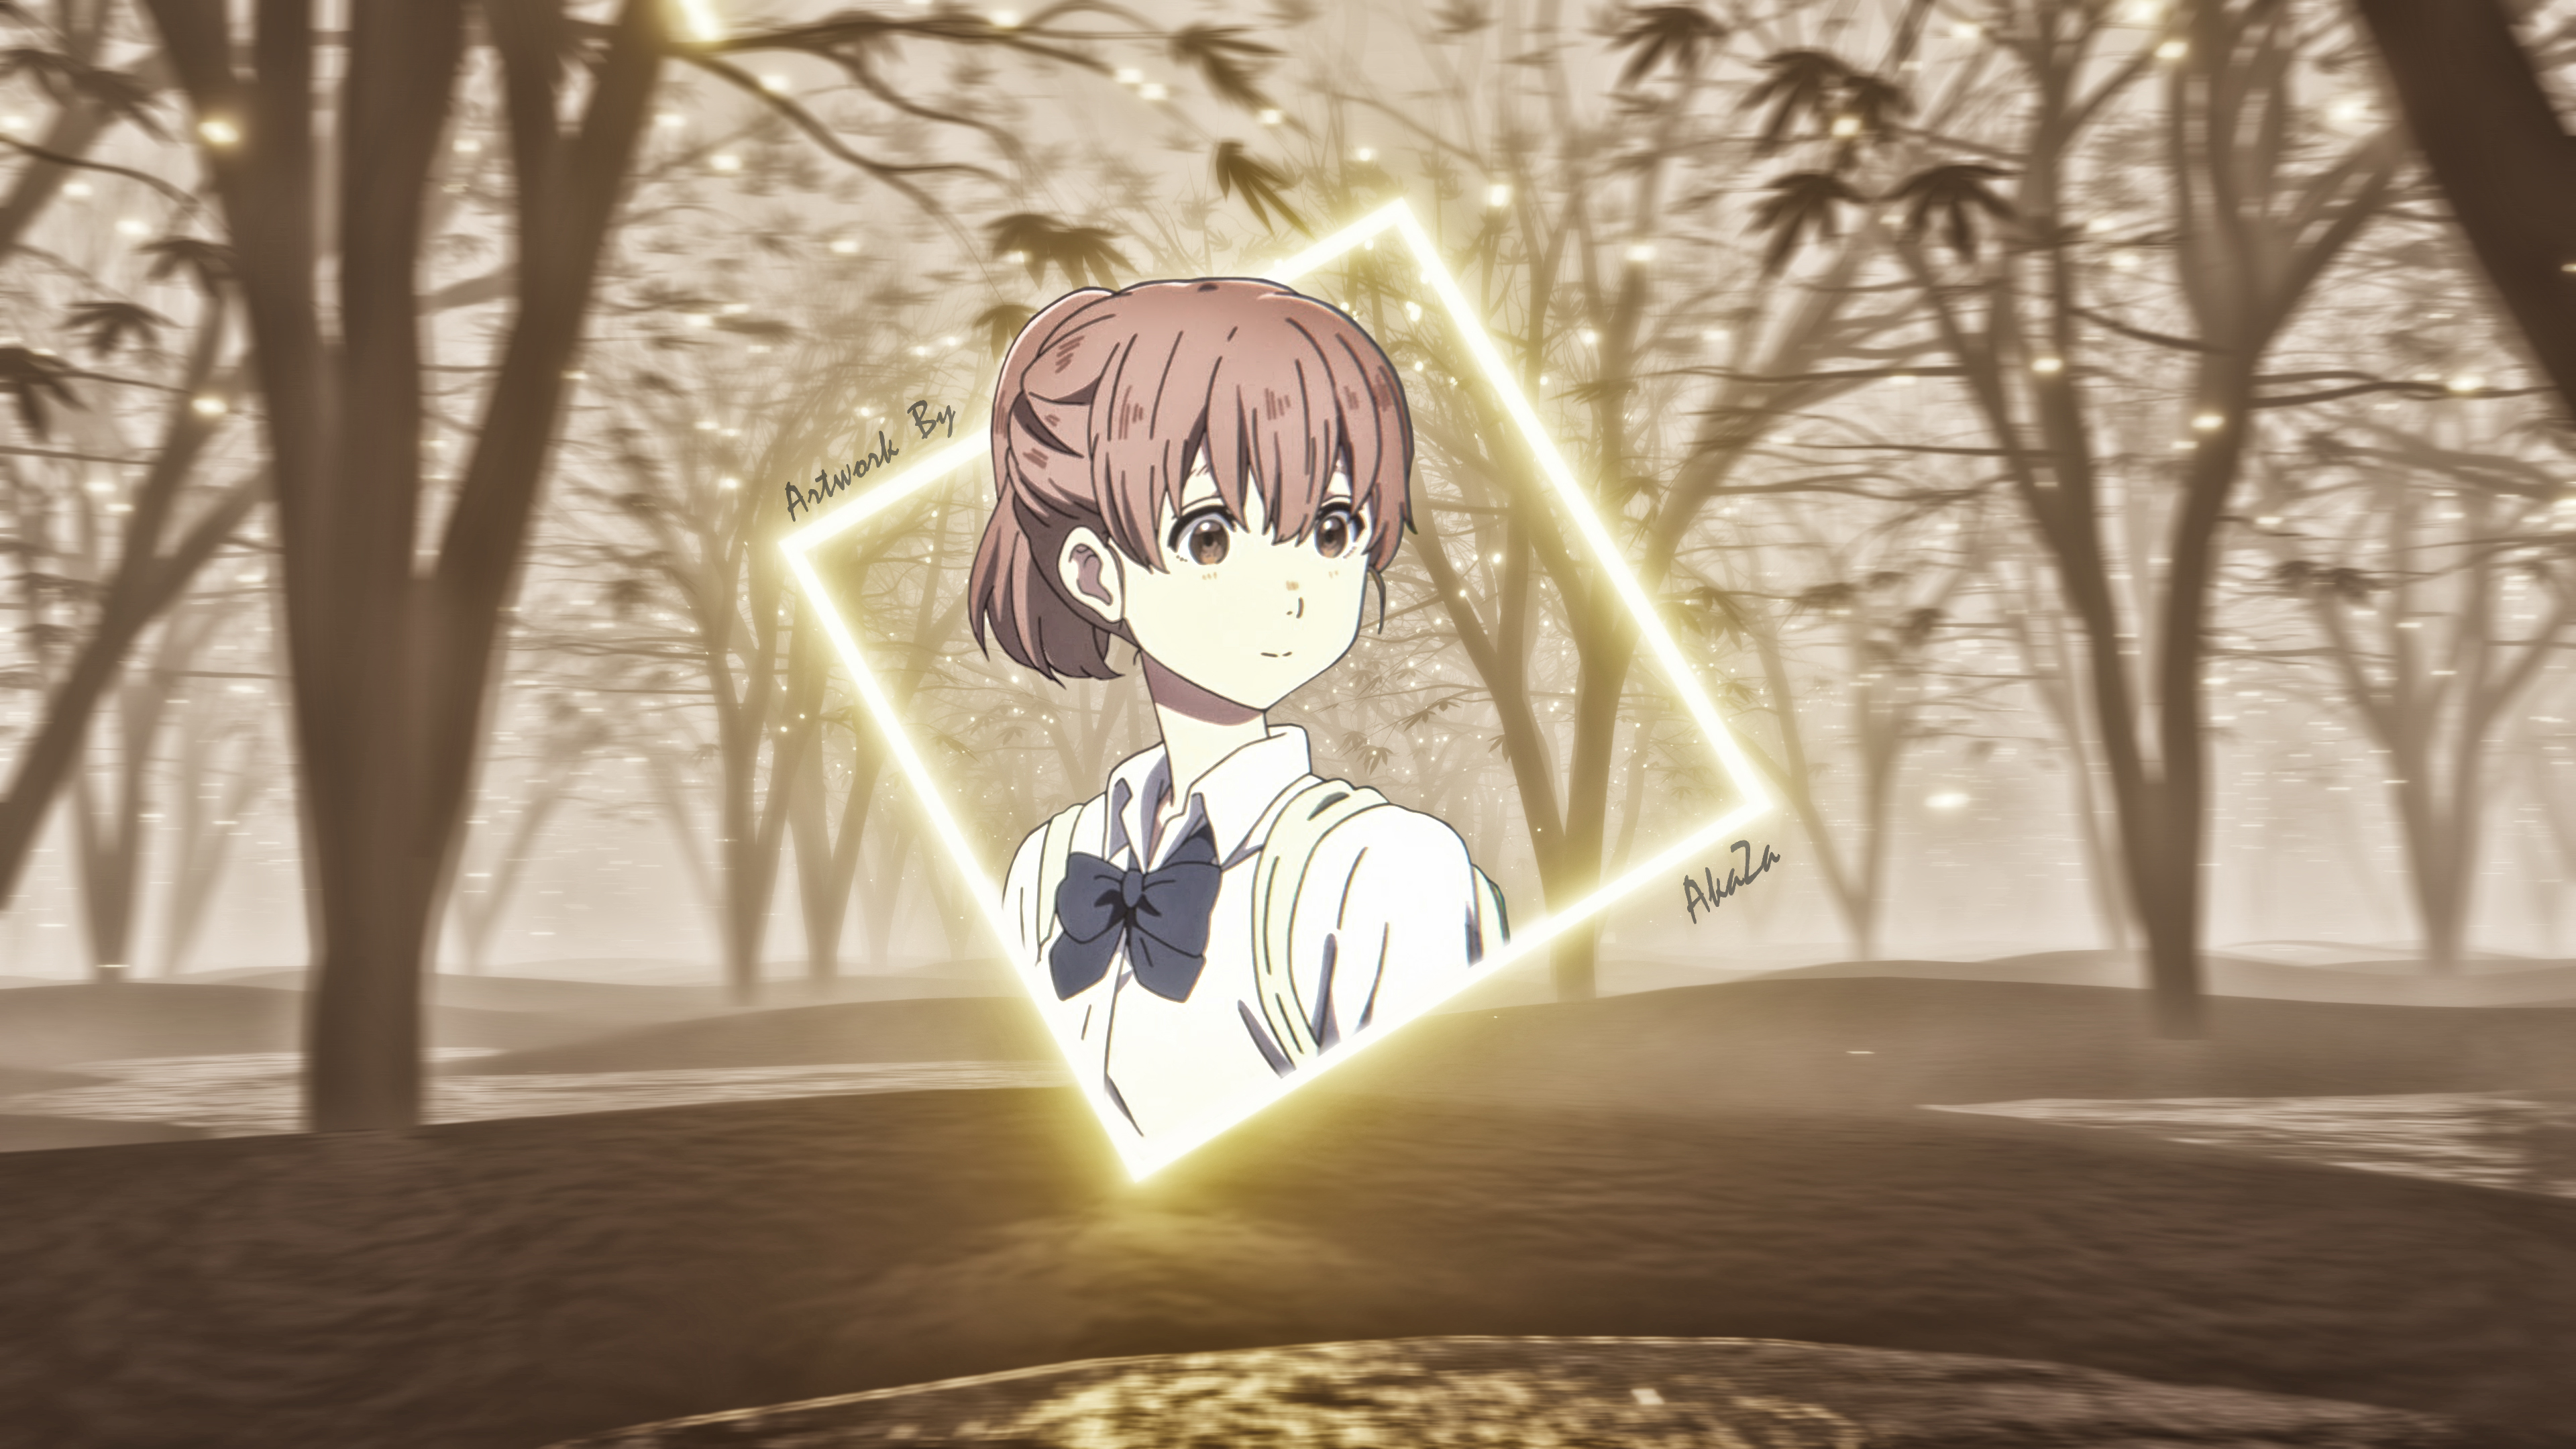 Anime 3840x2160 anime girls Koe no Katachi. picture-in-picture Shoko Nishimia floating particles